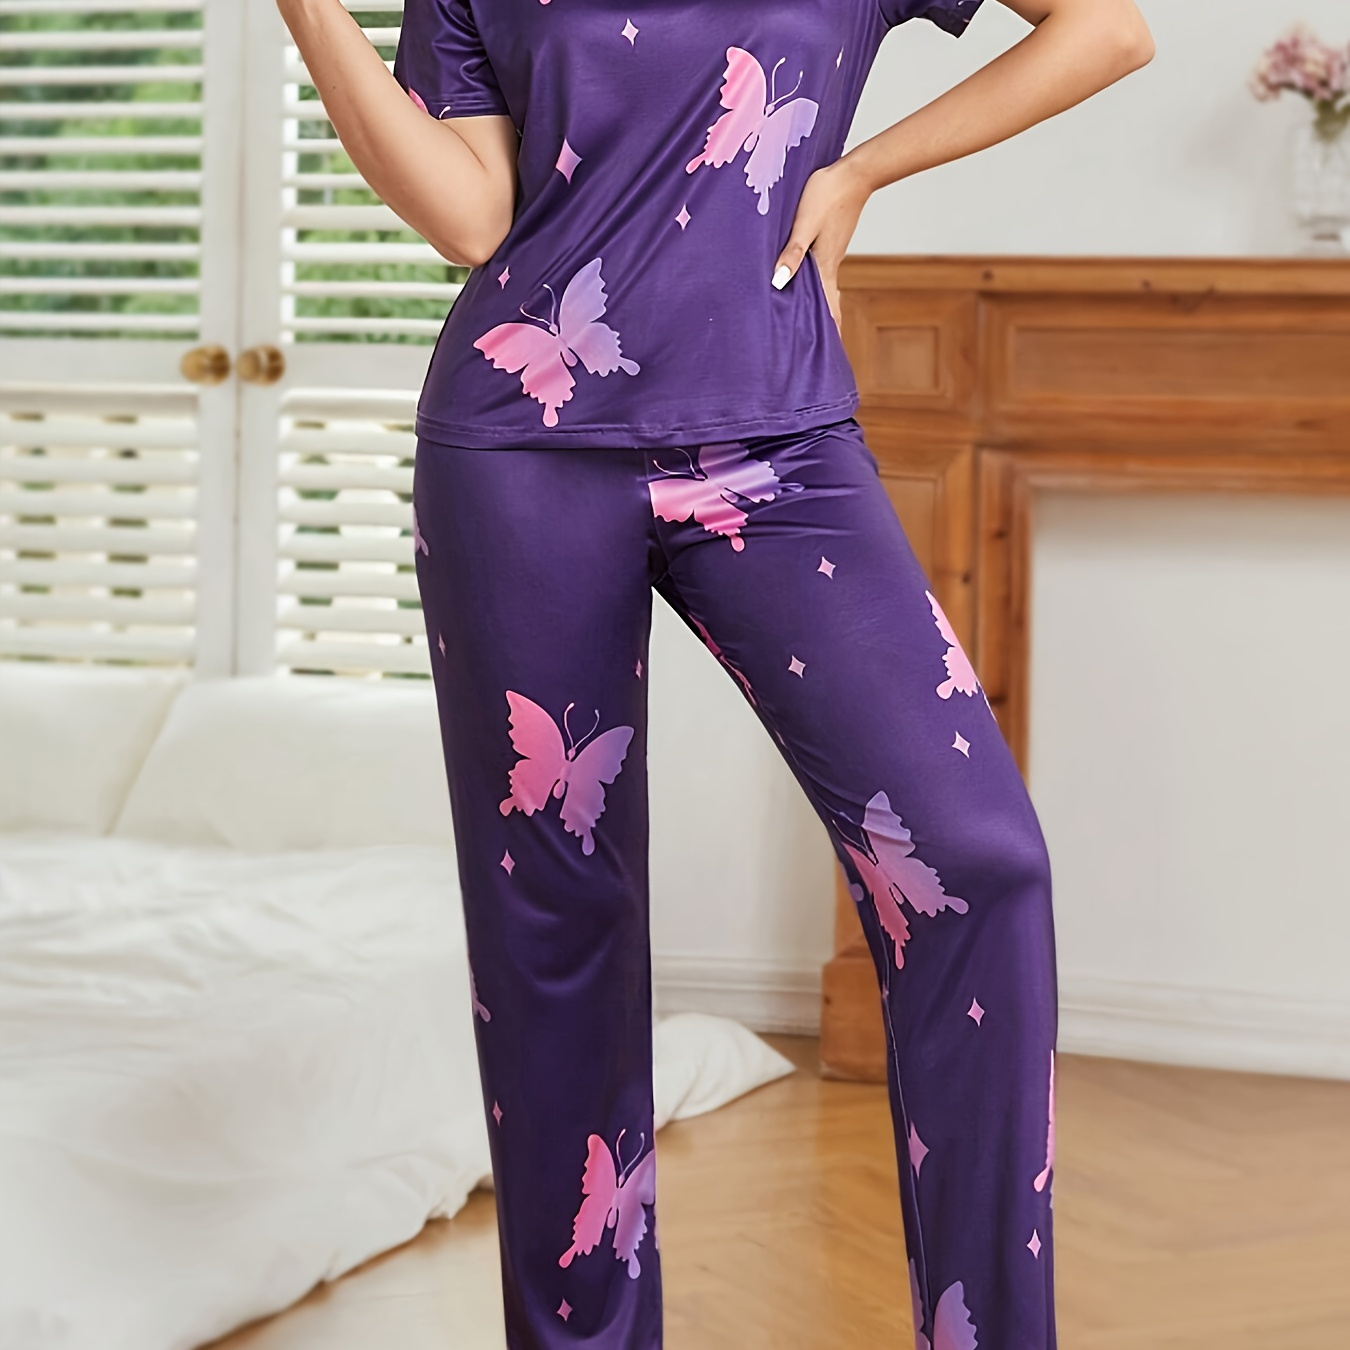 

Women's Ombre Butterfly Print Pajama Set, Short Sleeve Round Neck Top With Elastic Waistband Pants, Casual Style Sleepwear Lounge Set